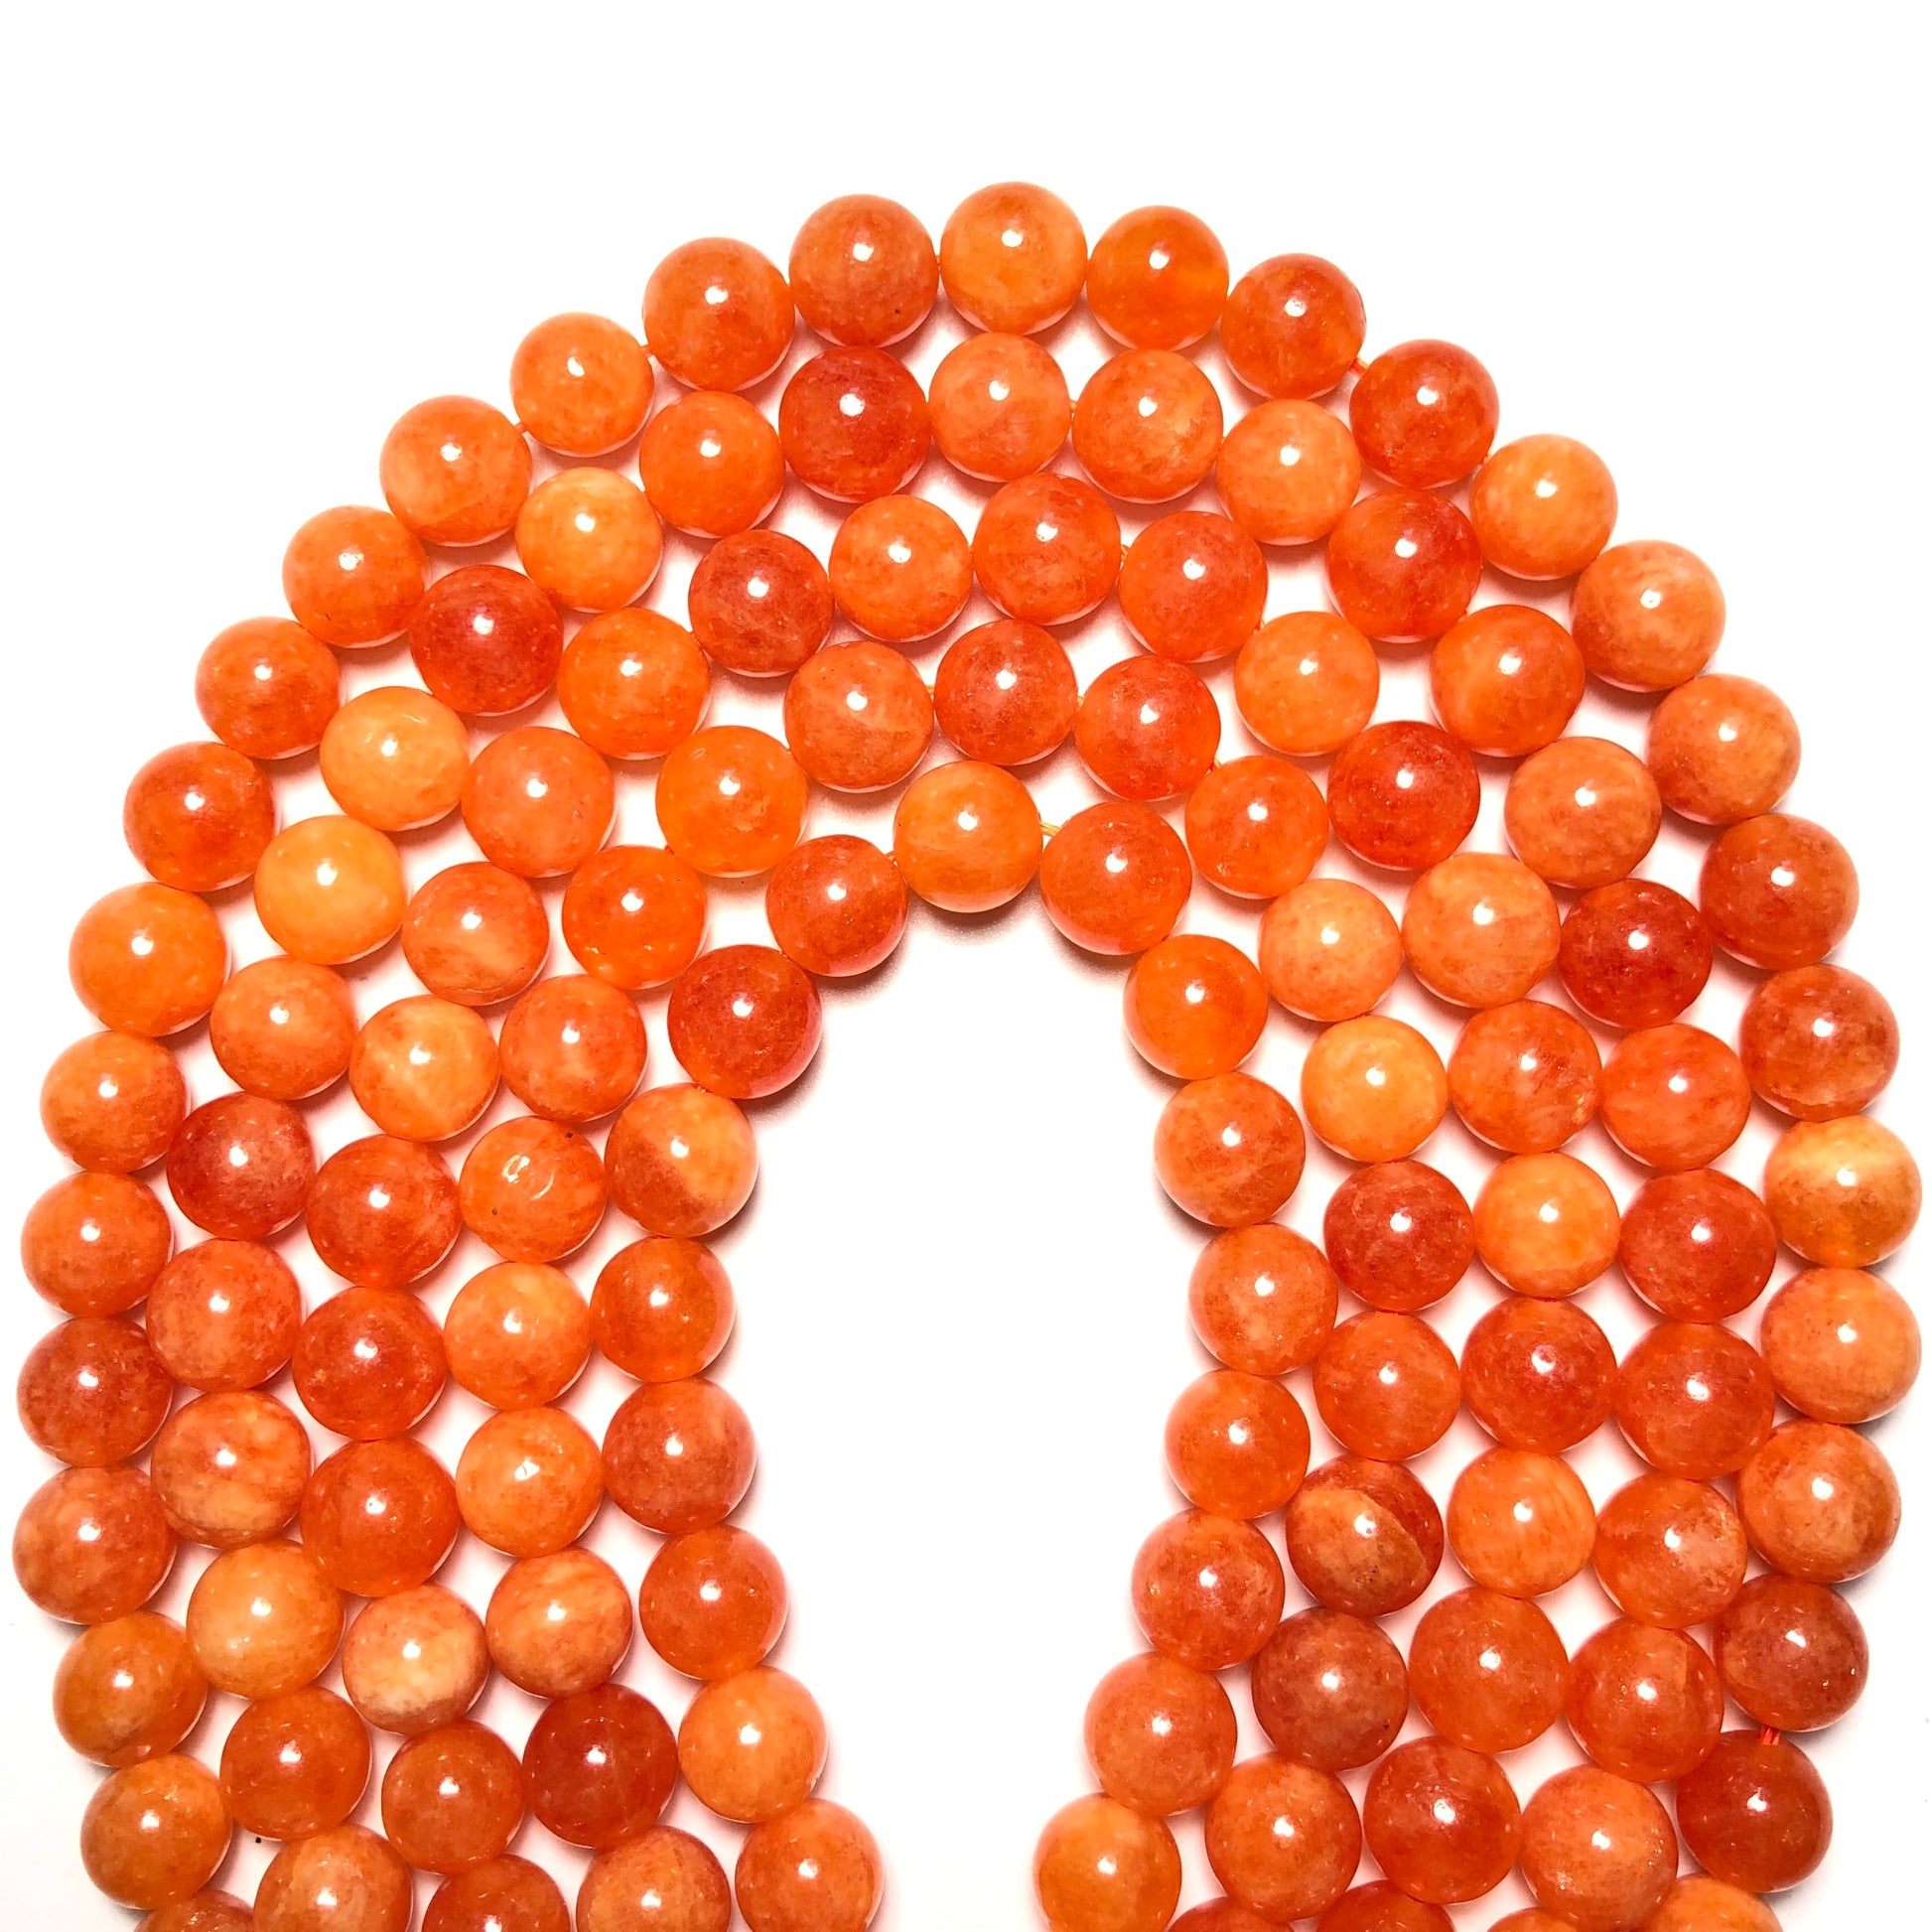 2 Strands/lot 10mm Multicolor Quartz Round Stone Beads Orange Gold Sunstone Stone Beads New Beads Arrivals Other Stone Beads Charms Beads Beyond